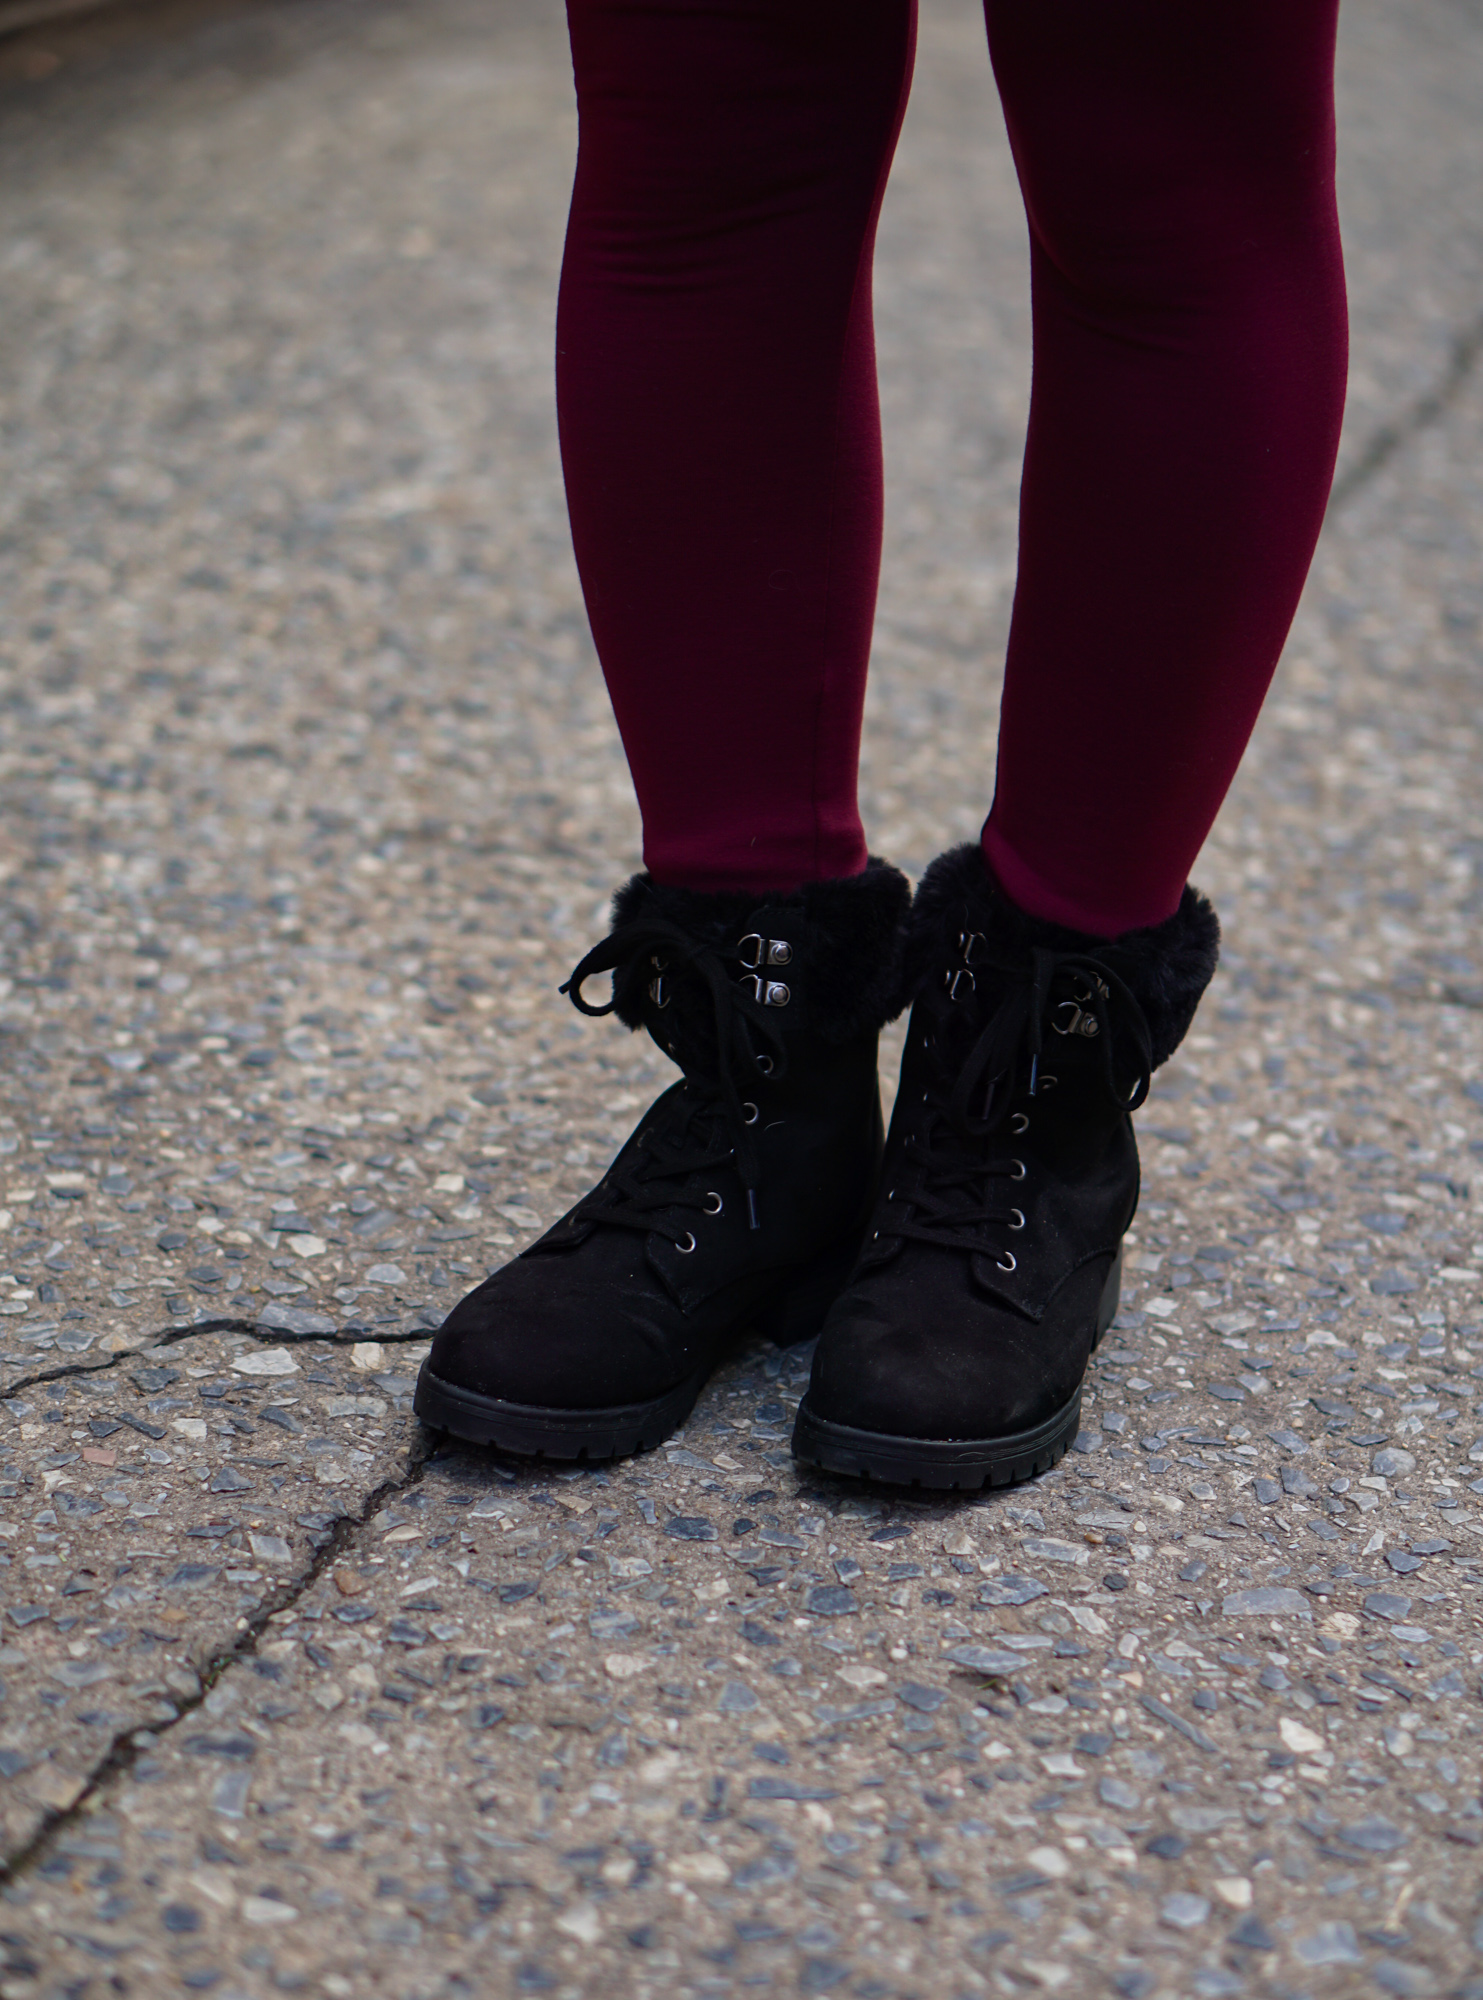 Cute boots for winter